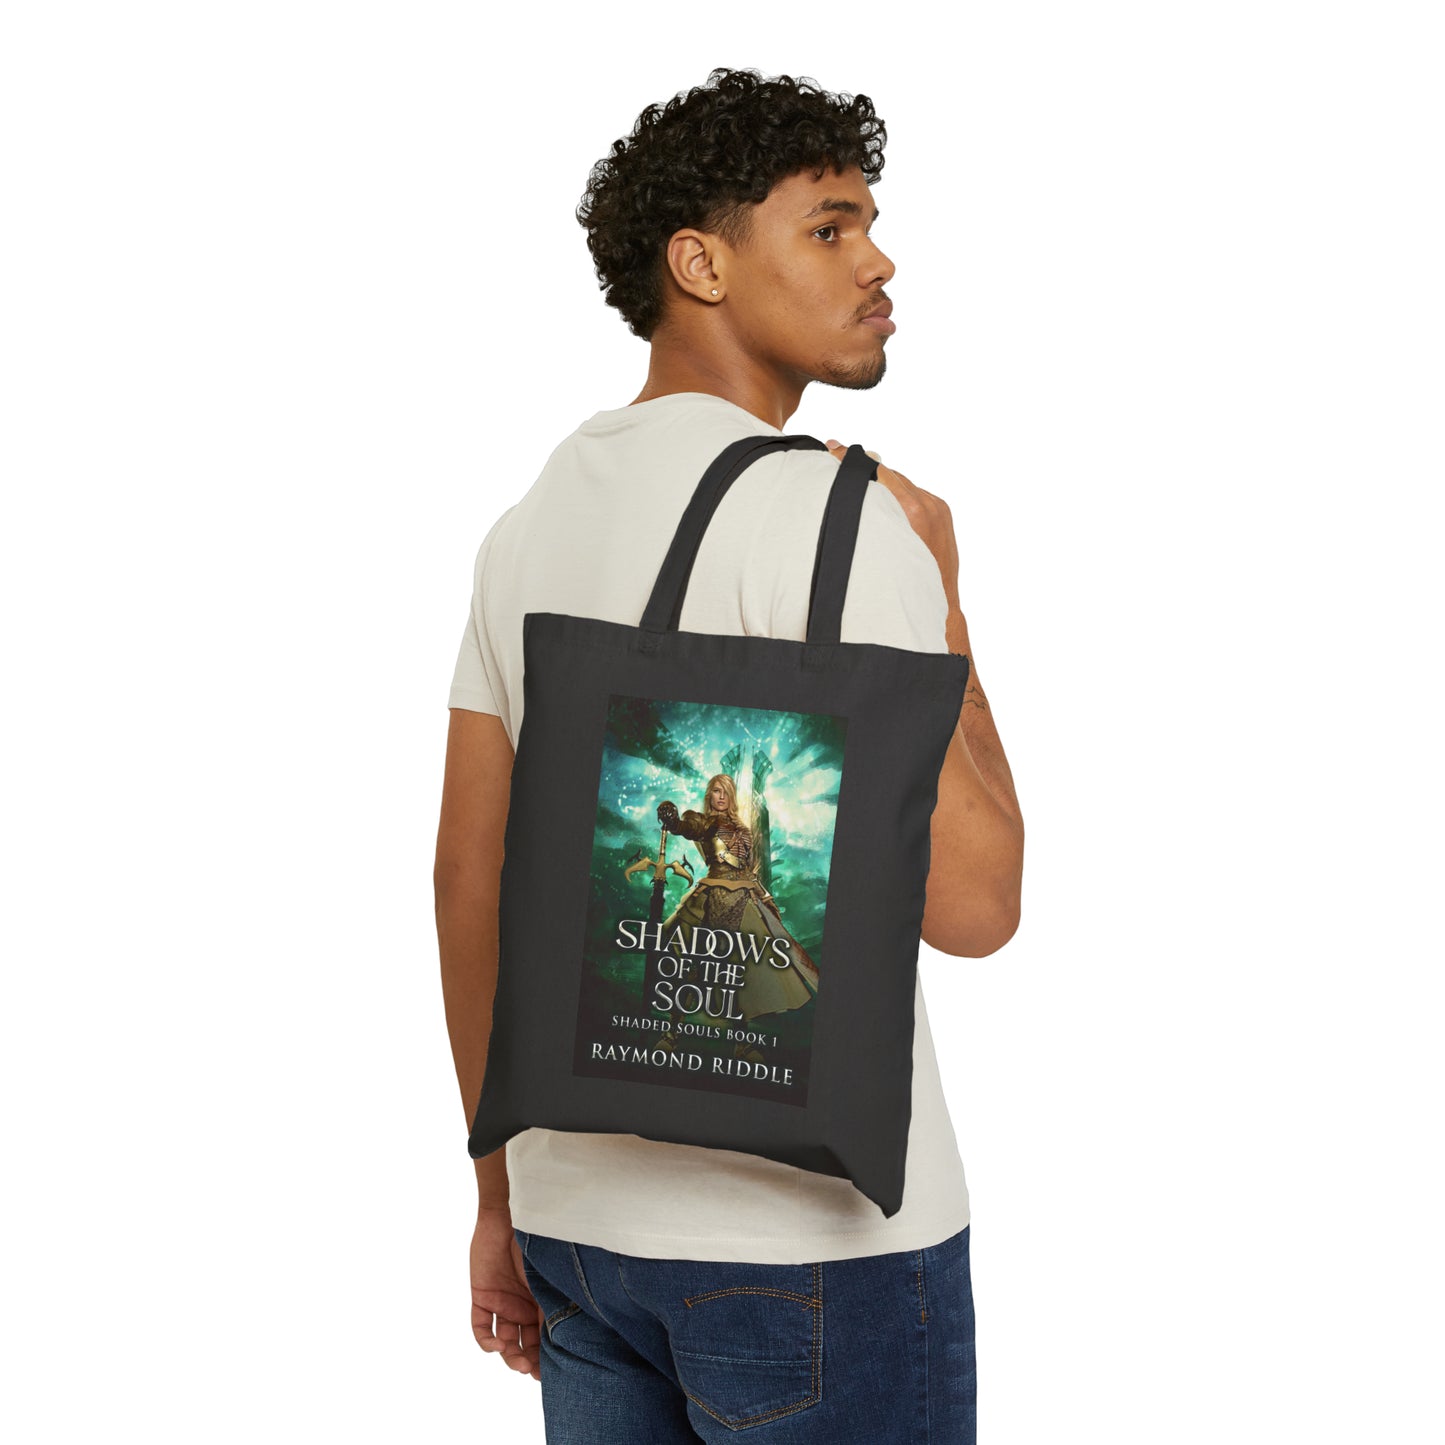 Shadows Of The Soul - Cotton Canvas Tote Bag